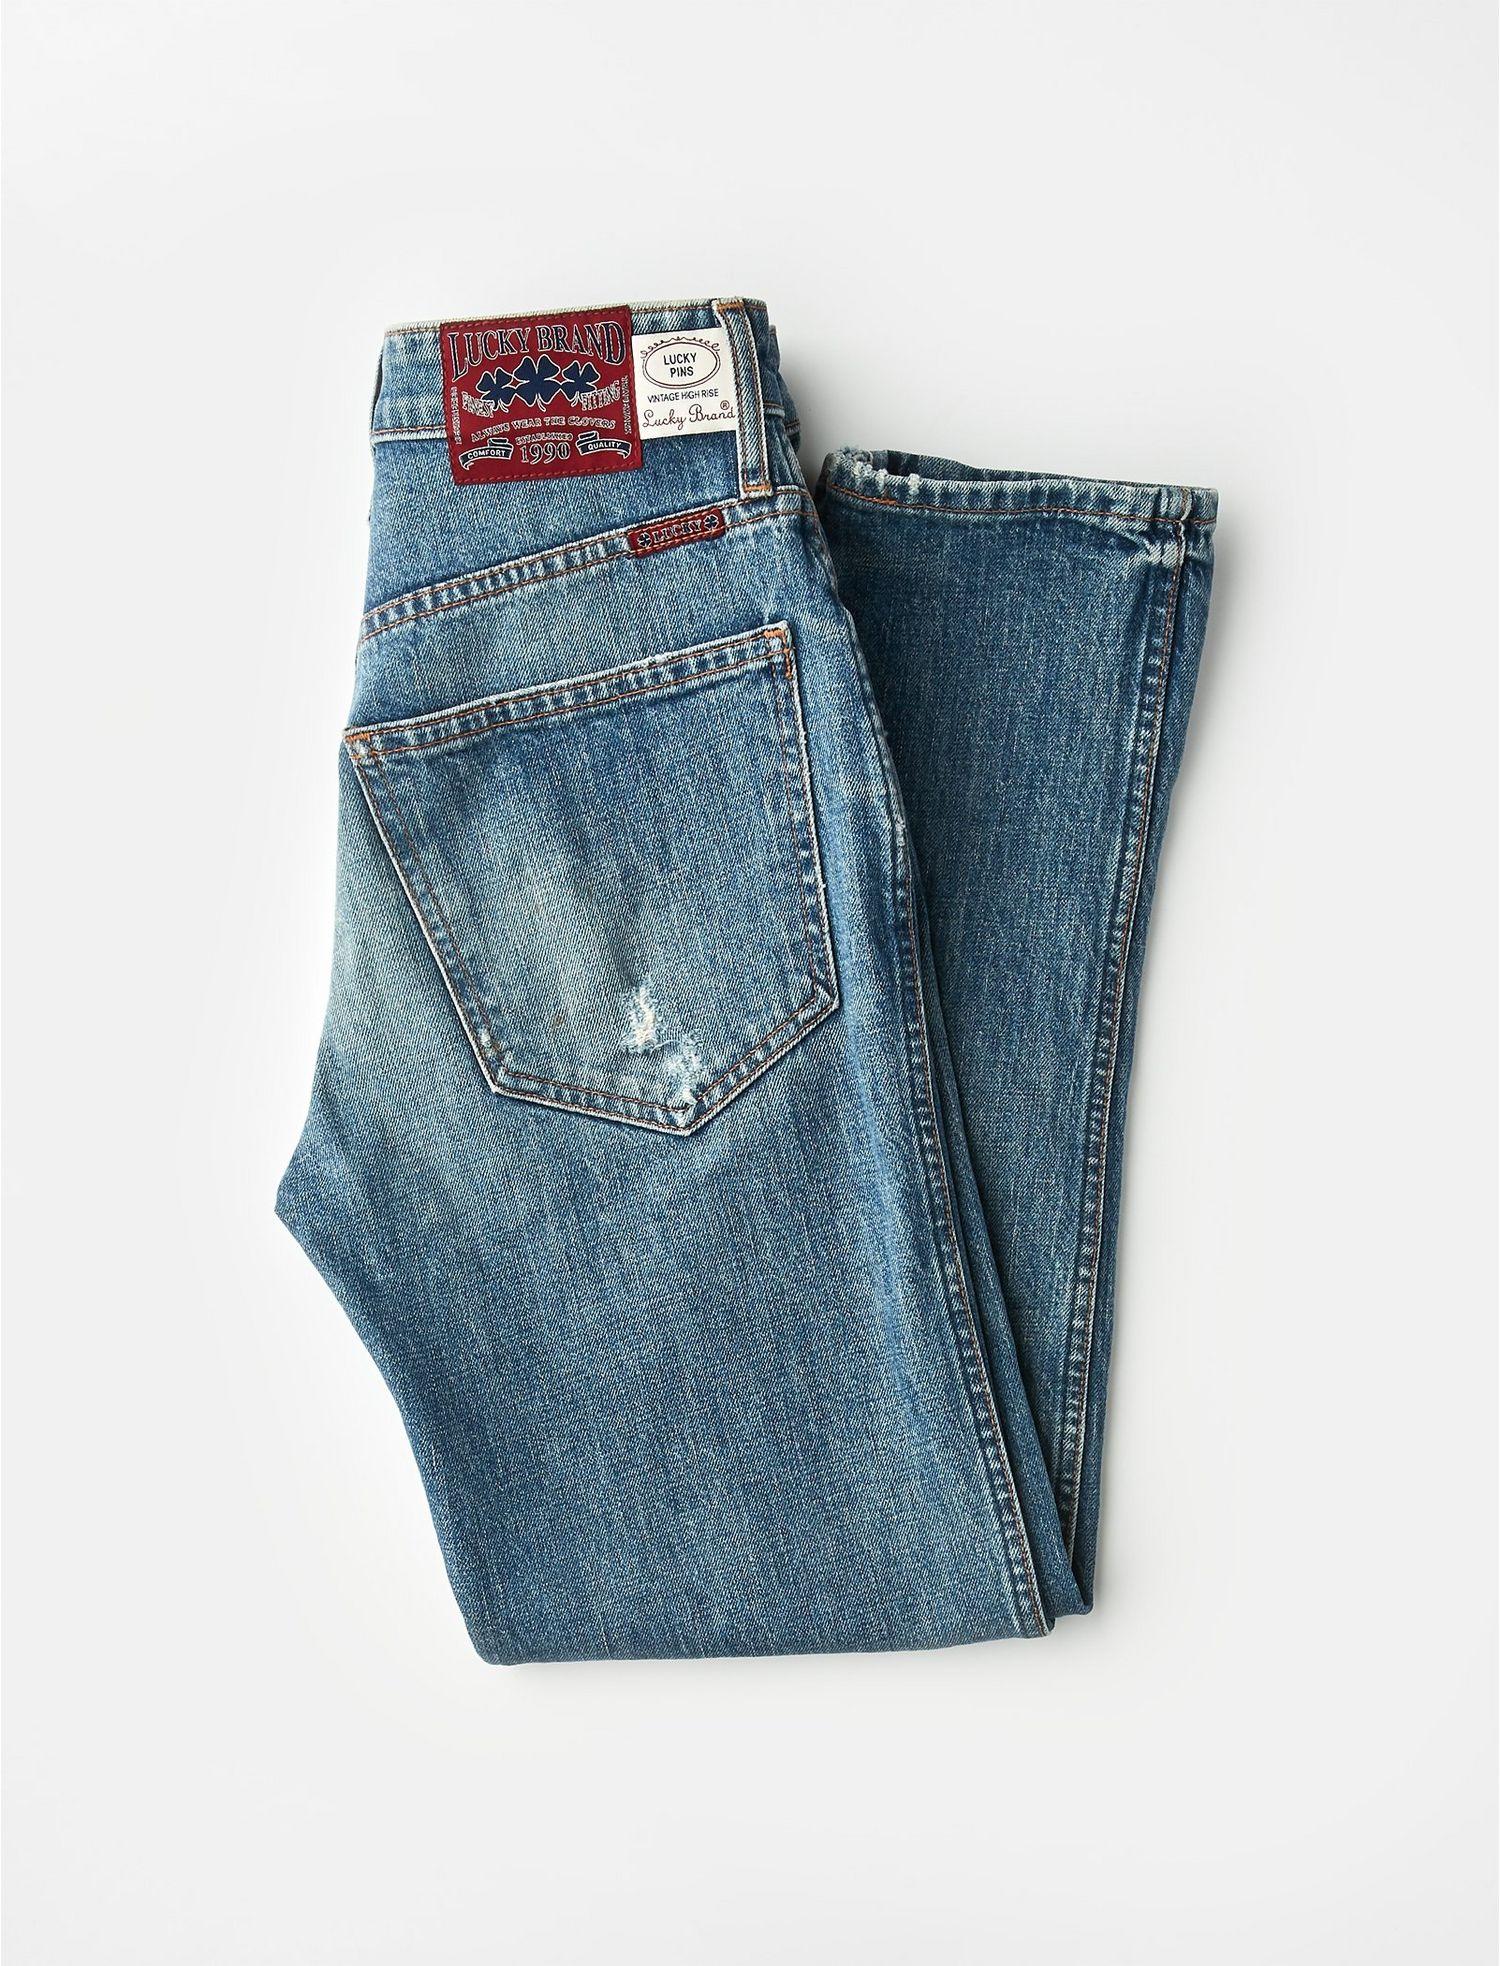 lucky pins jeans